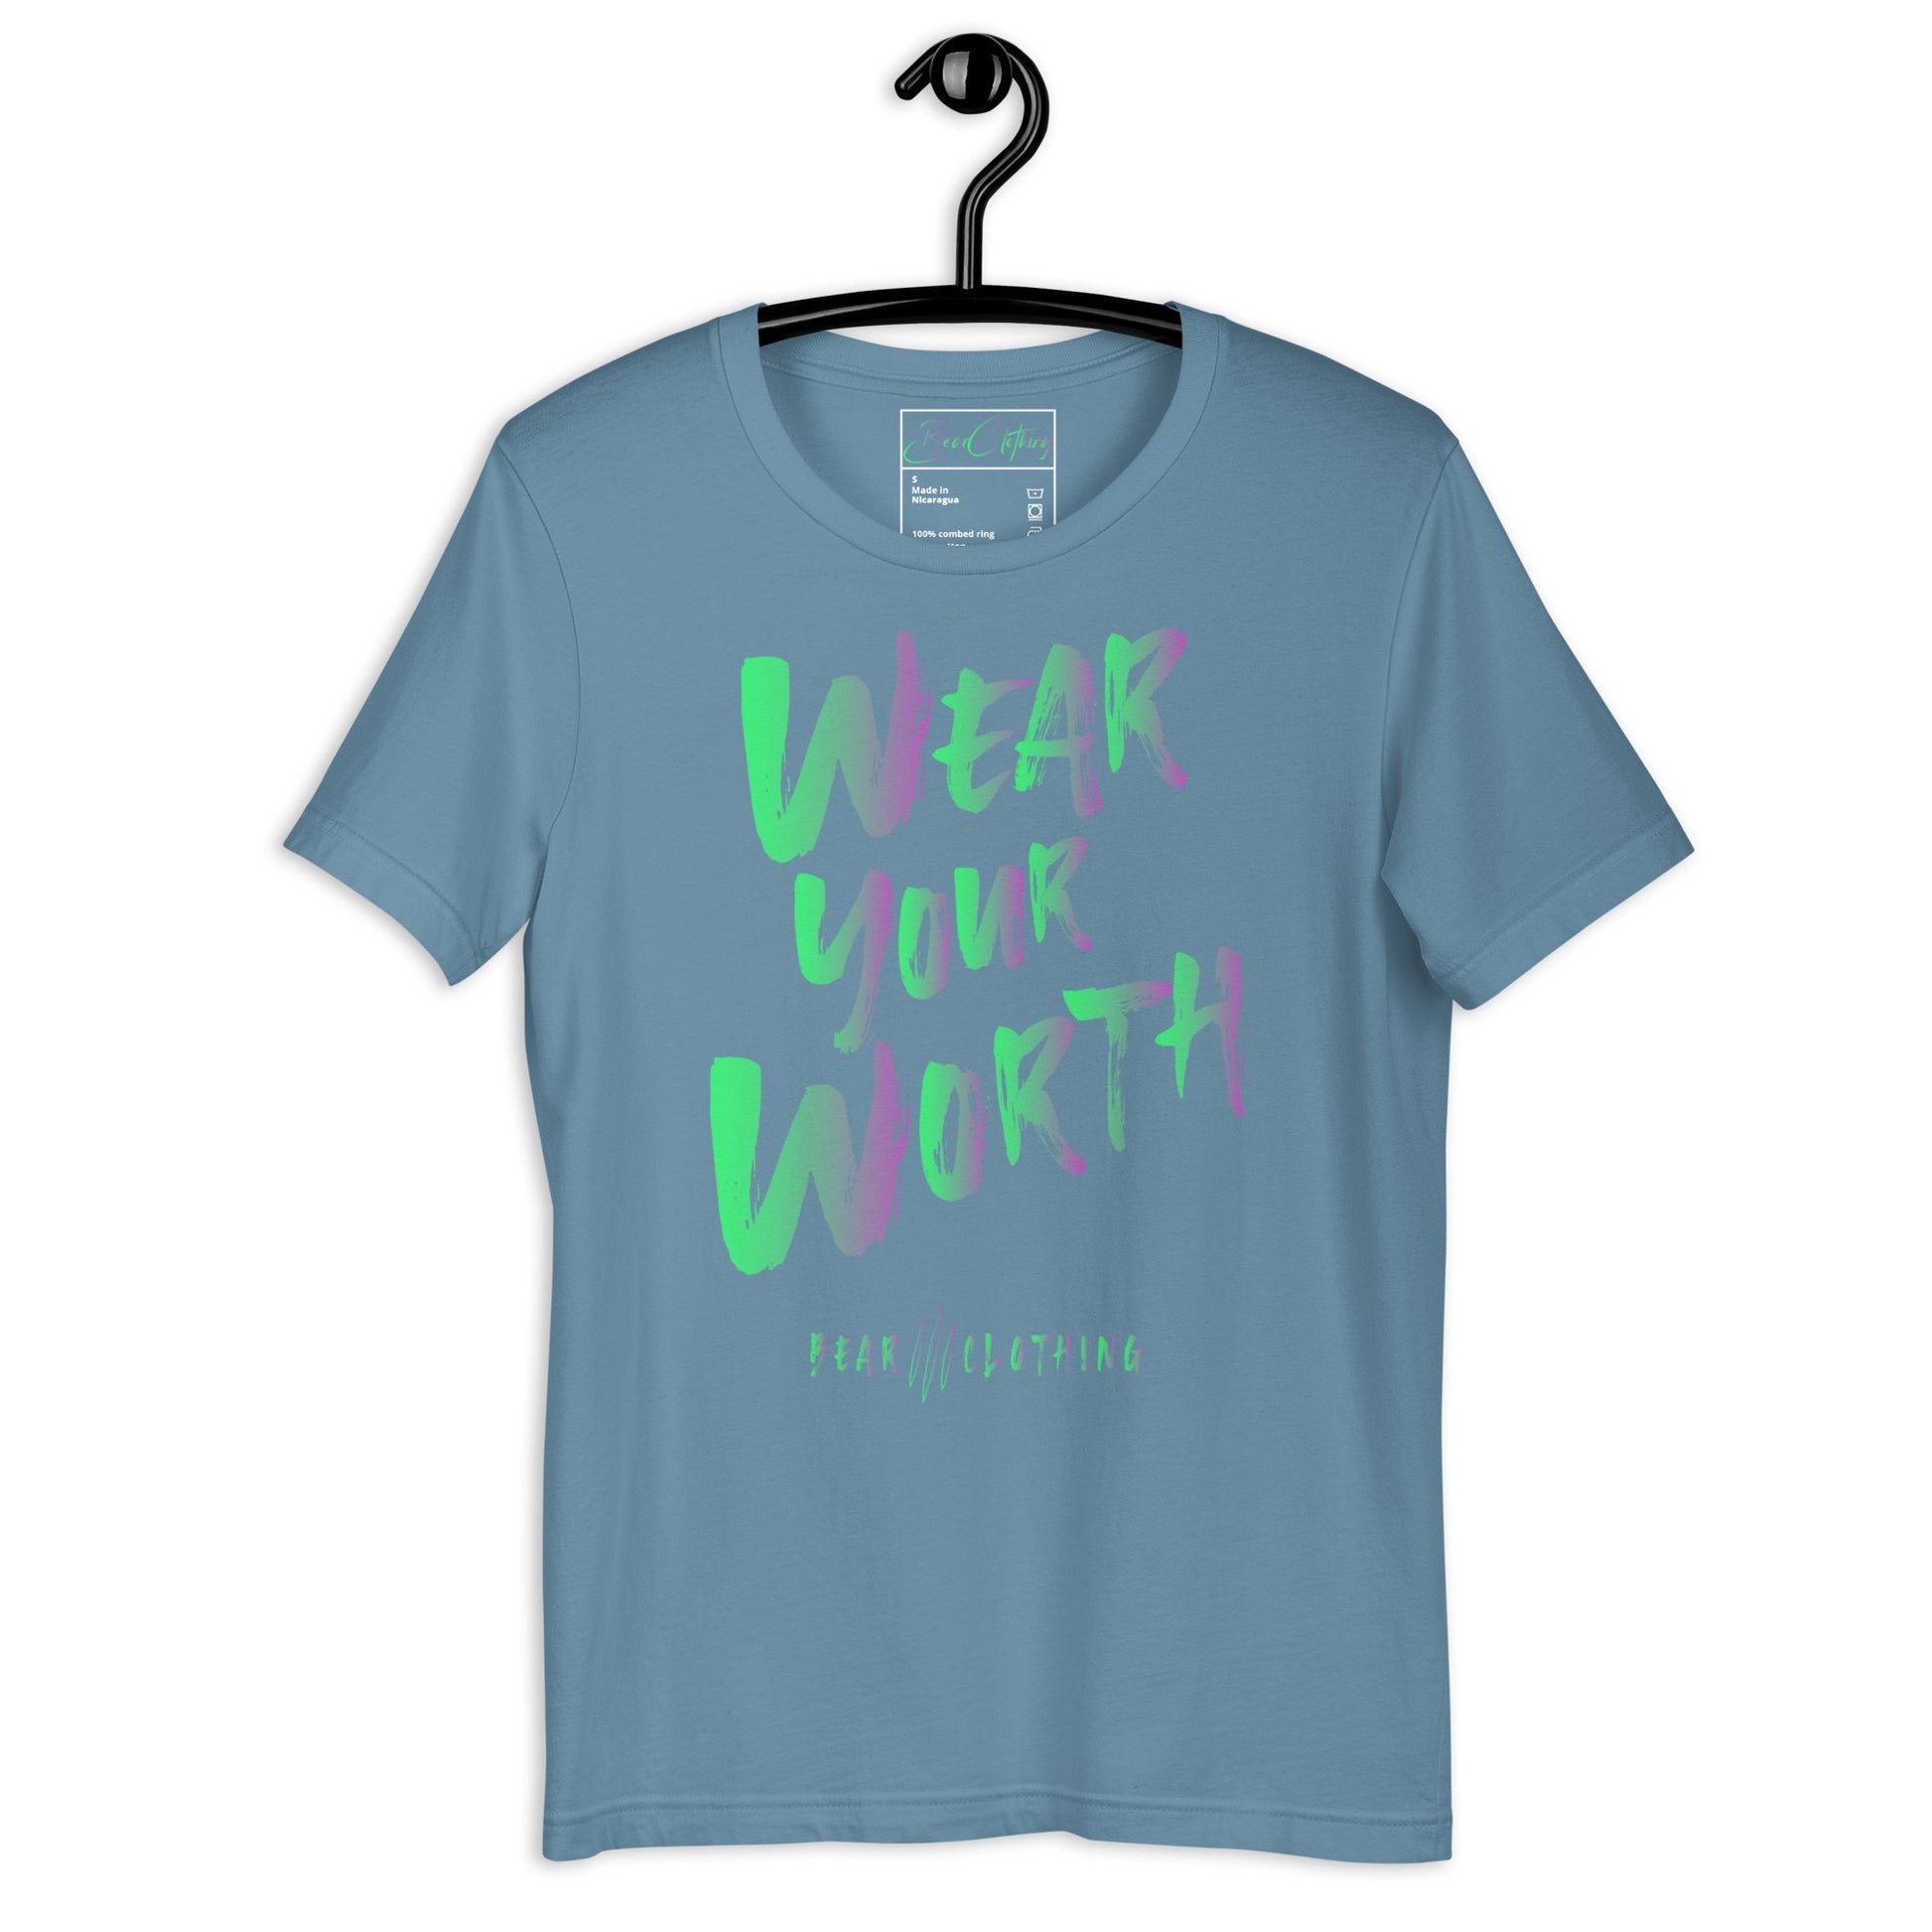 Multi-colored Wear Your Worth Tee - Bearclothing